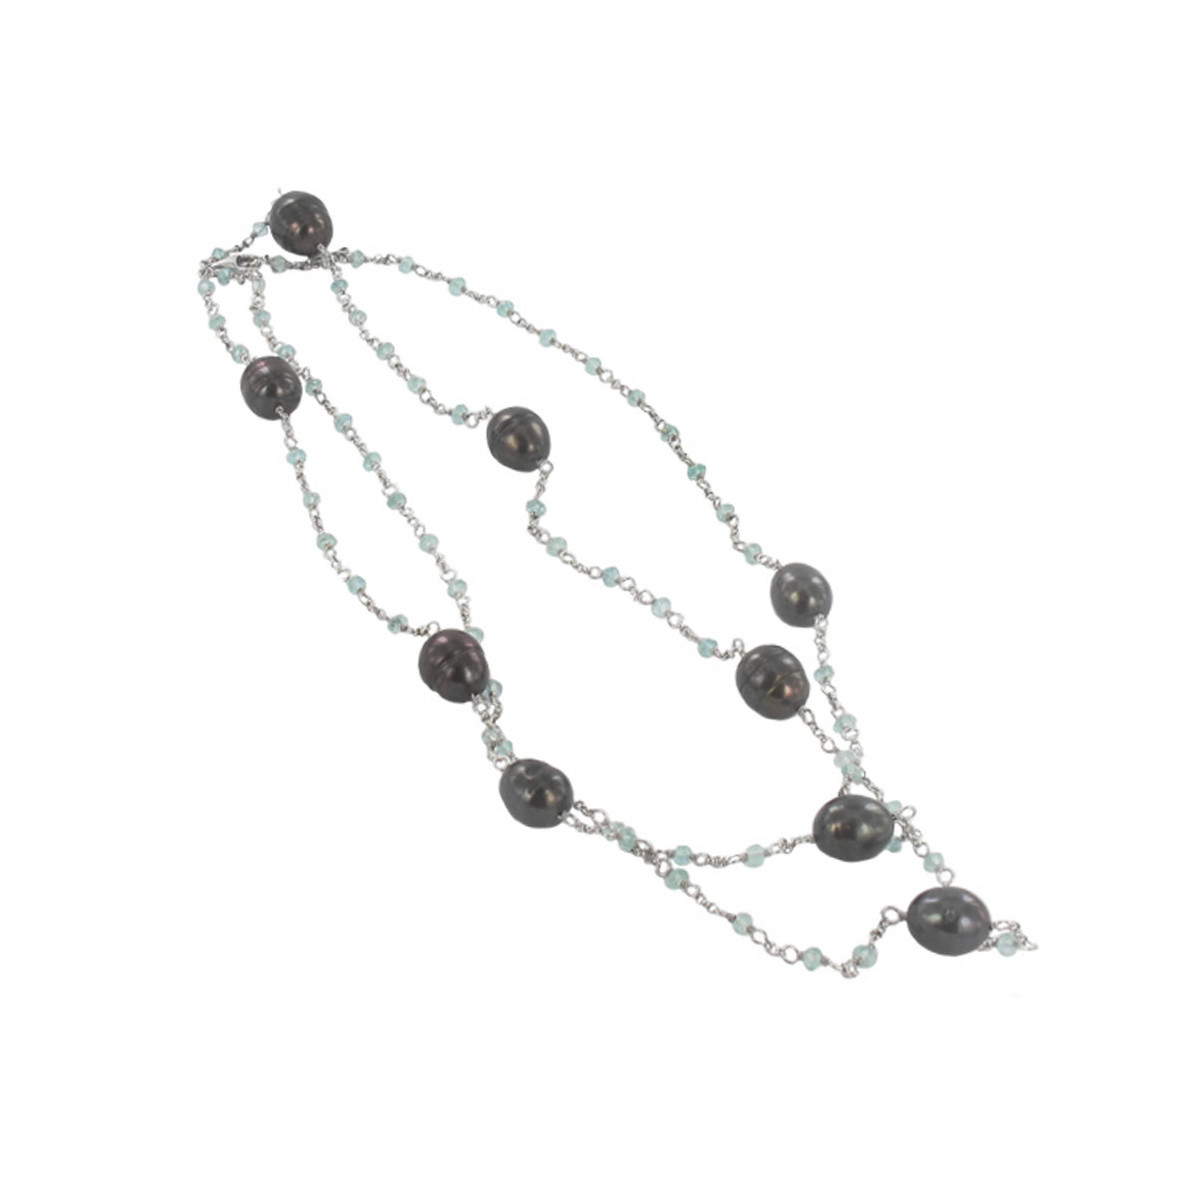 BLACK PEARLS AND SILVER NECKLACE